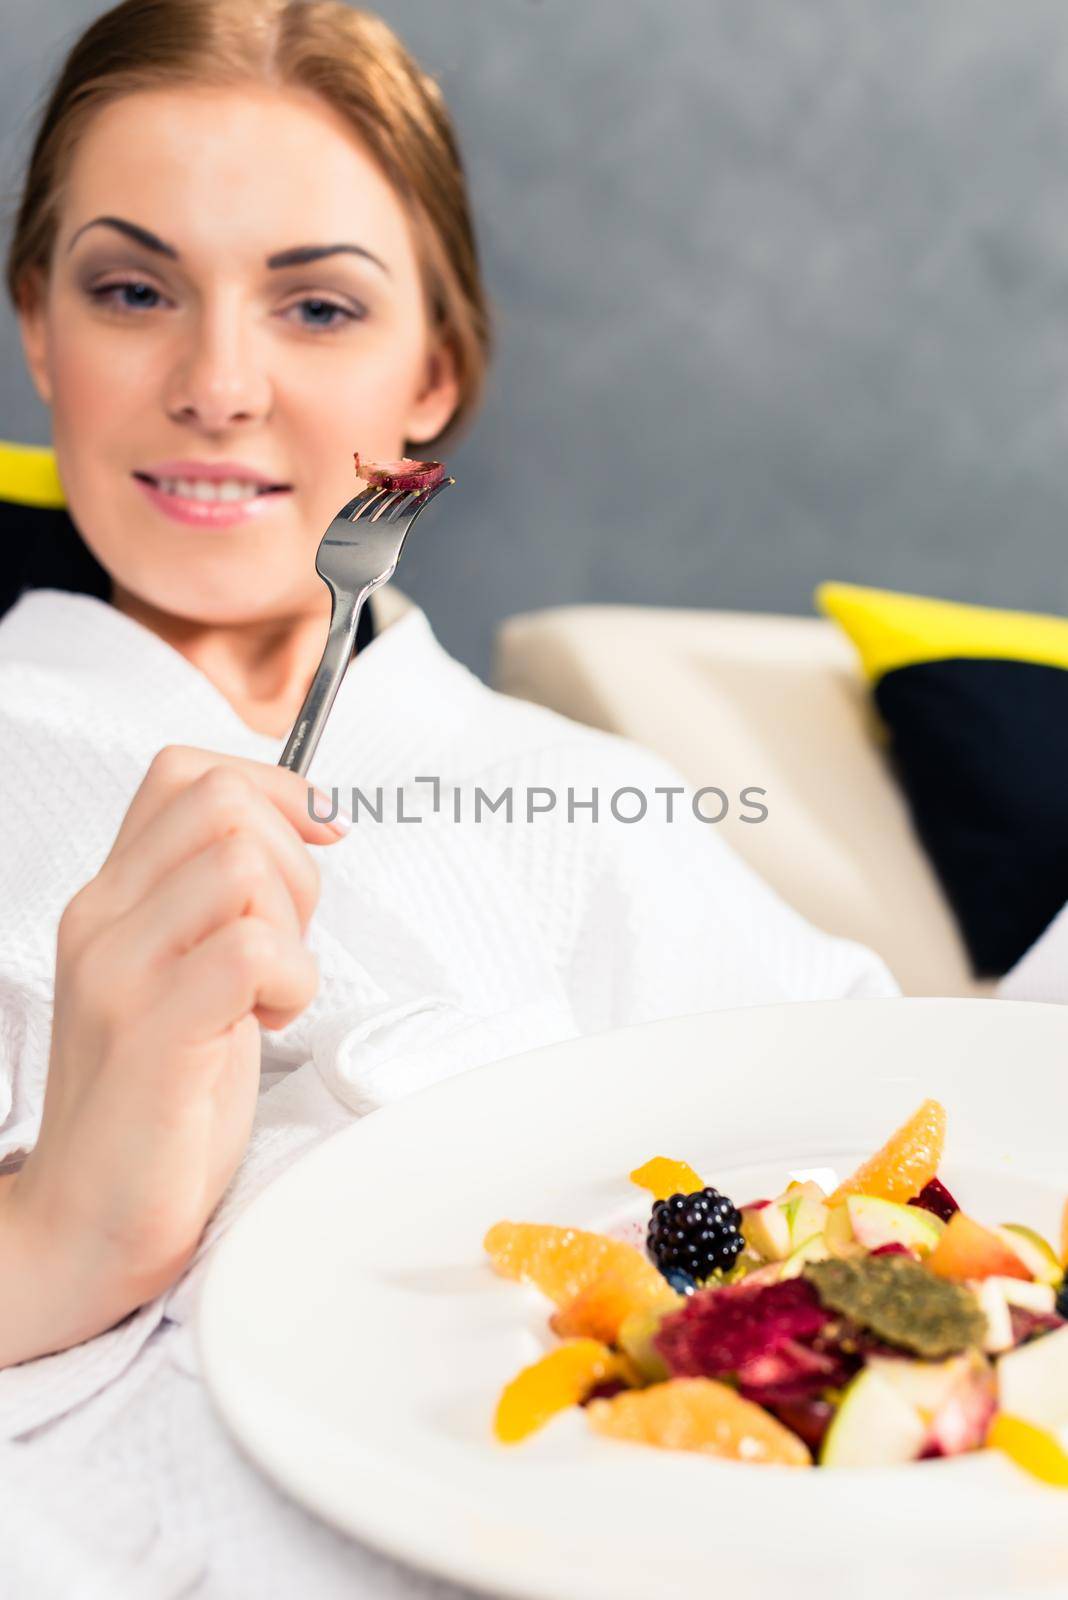 Smiling woman eating healthy food by Kzenon